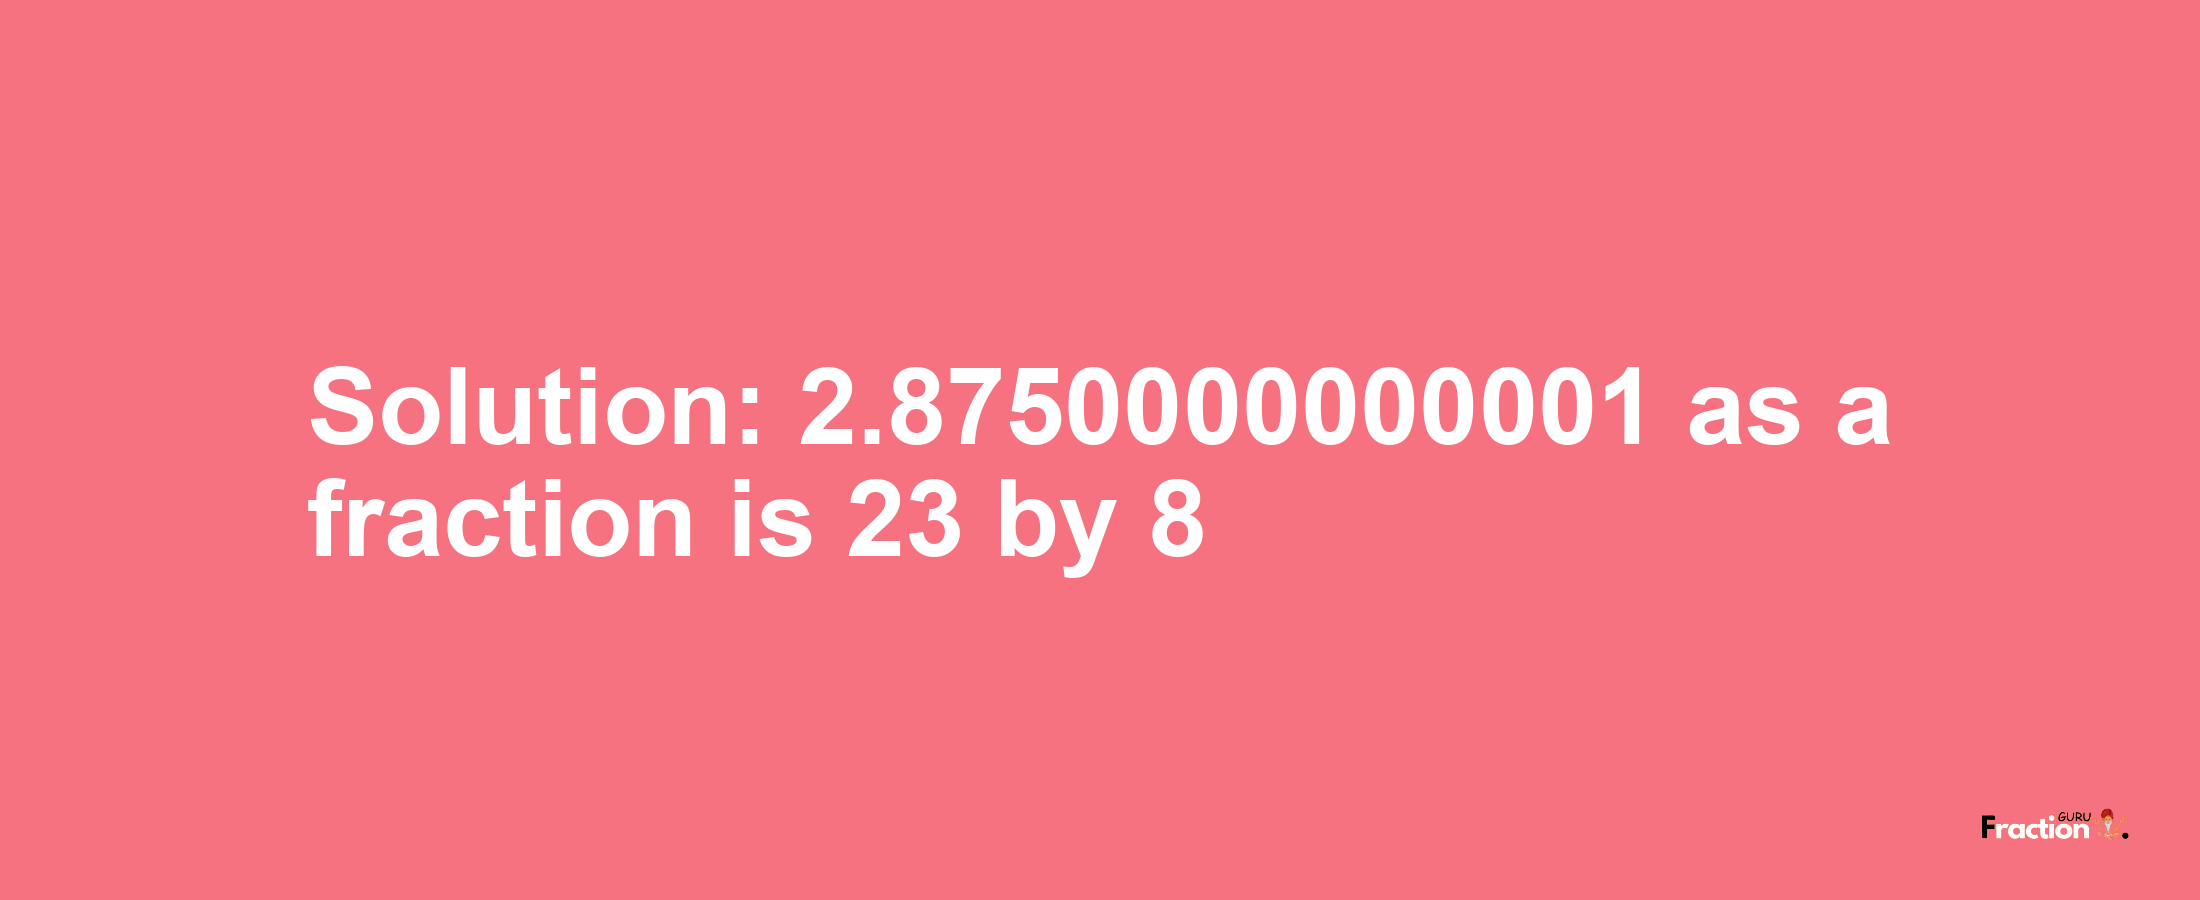 Solution:2.8750000000001 as a fraction is 23/8